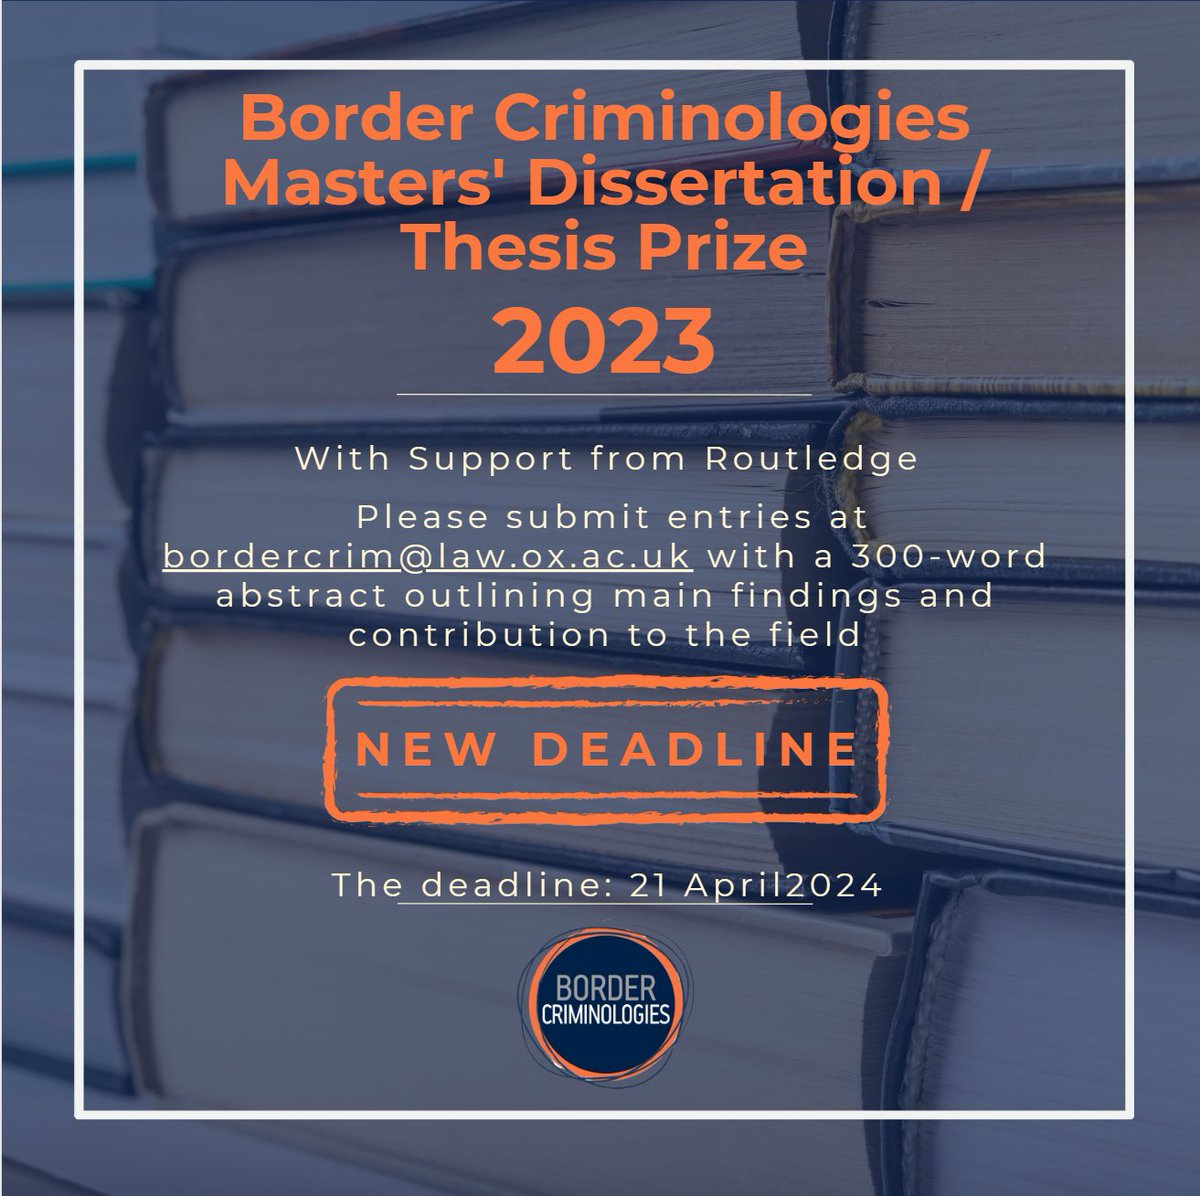 [EXTENDED Call for Submissions📢] We have extended our CfS for our Master's Dissertation / Thesis Prize to the 21st of April, 2024! Find more info here: law.ox.ac.uk/content/news/b…